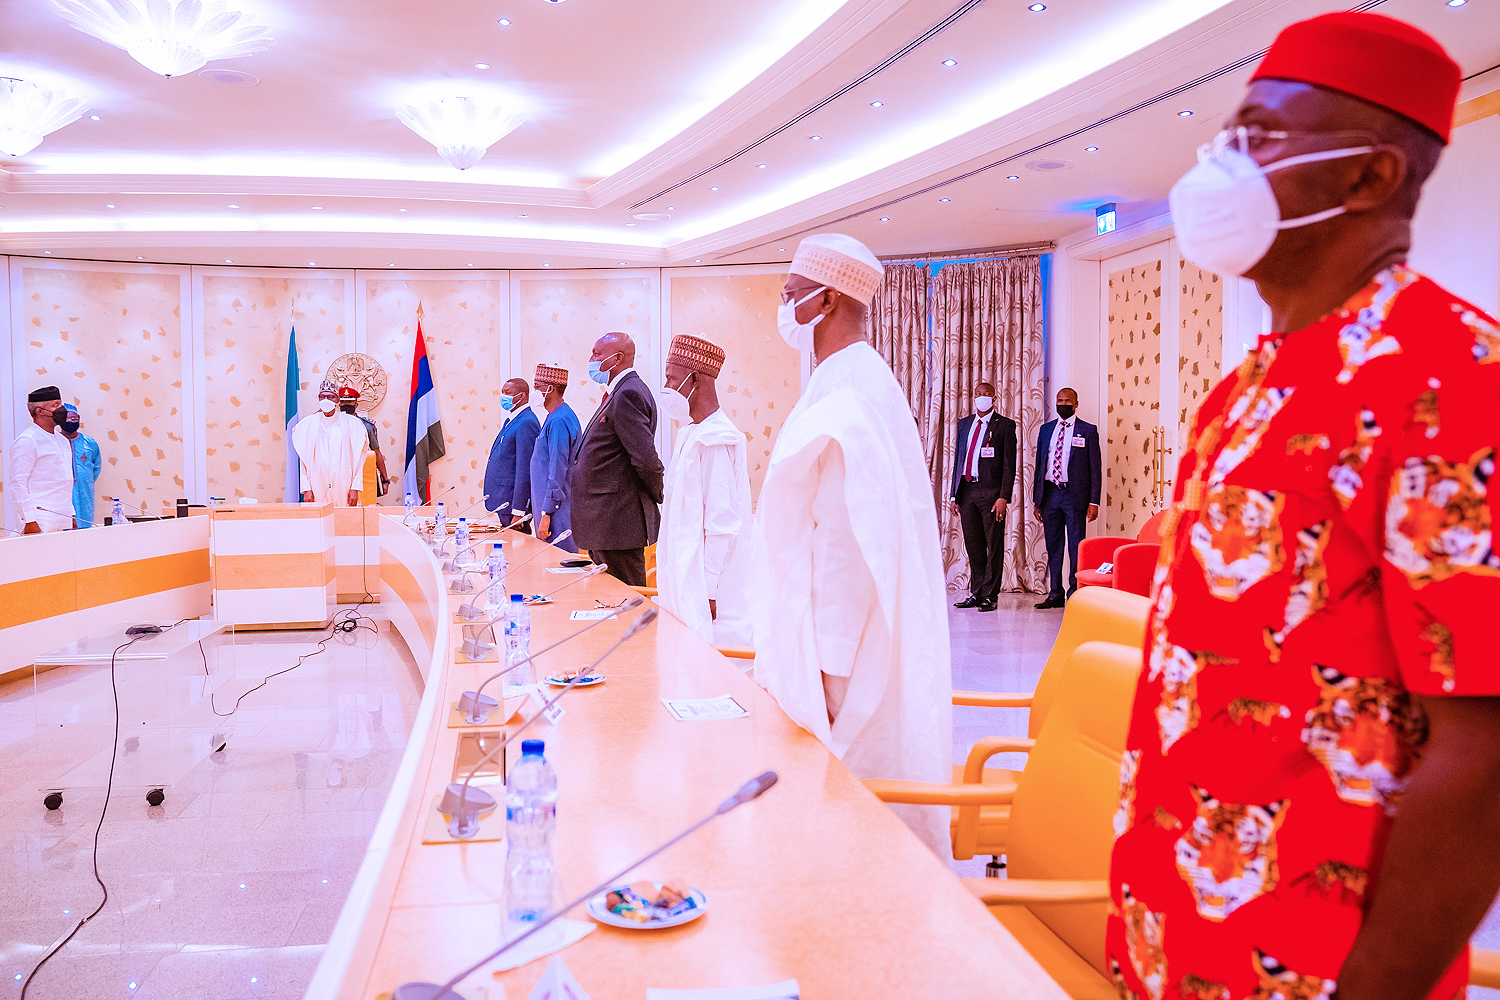 President Buhari Inaugurates Board Of Nigeria Sovereign Investment Authority (NSIA) & Presides Over Federal Executive Council Meeting On 01/09/2021